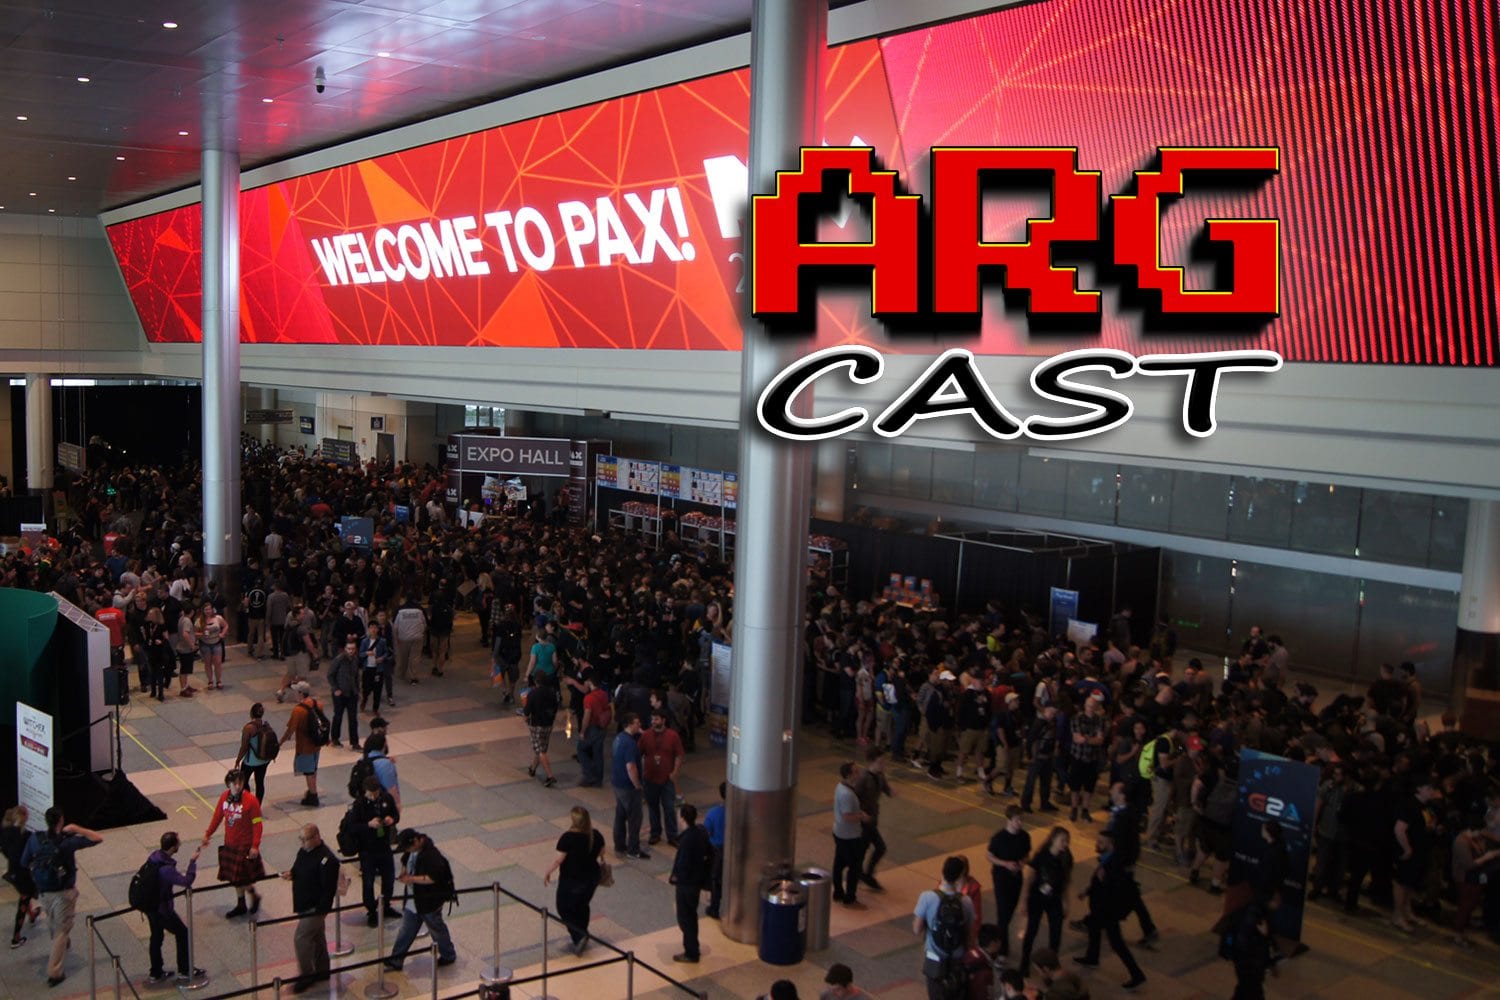 ARGcast #103: Pre PAX East 2018 with Andre, Bill, and Amanda